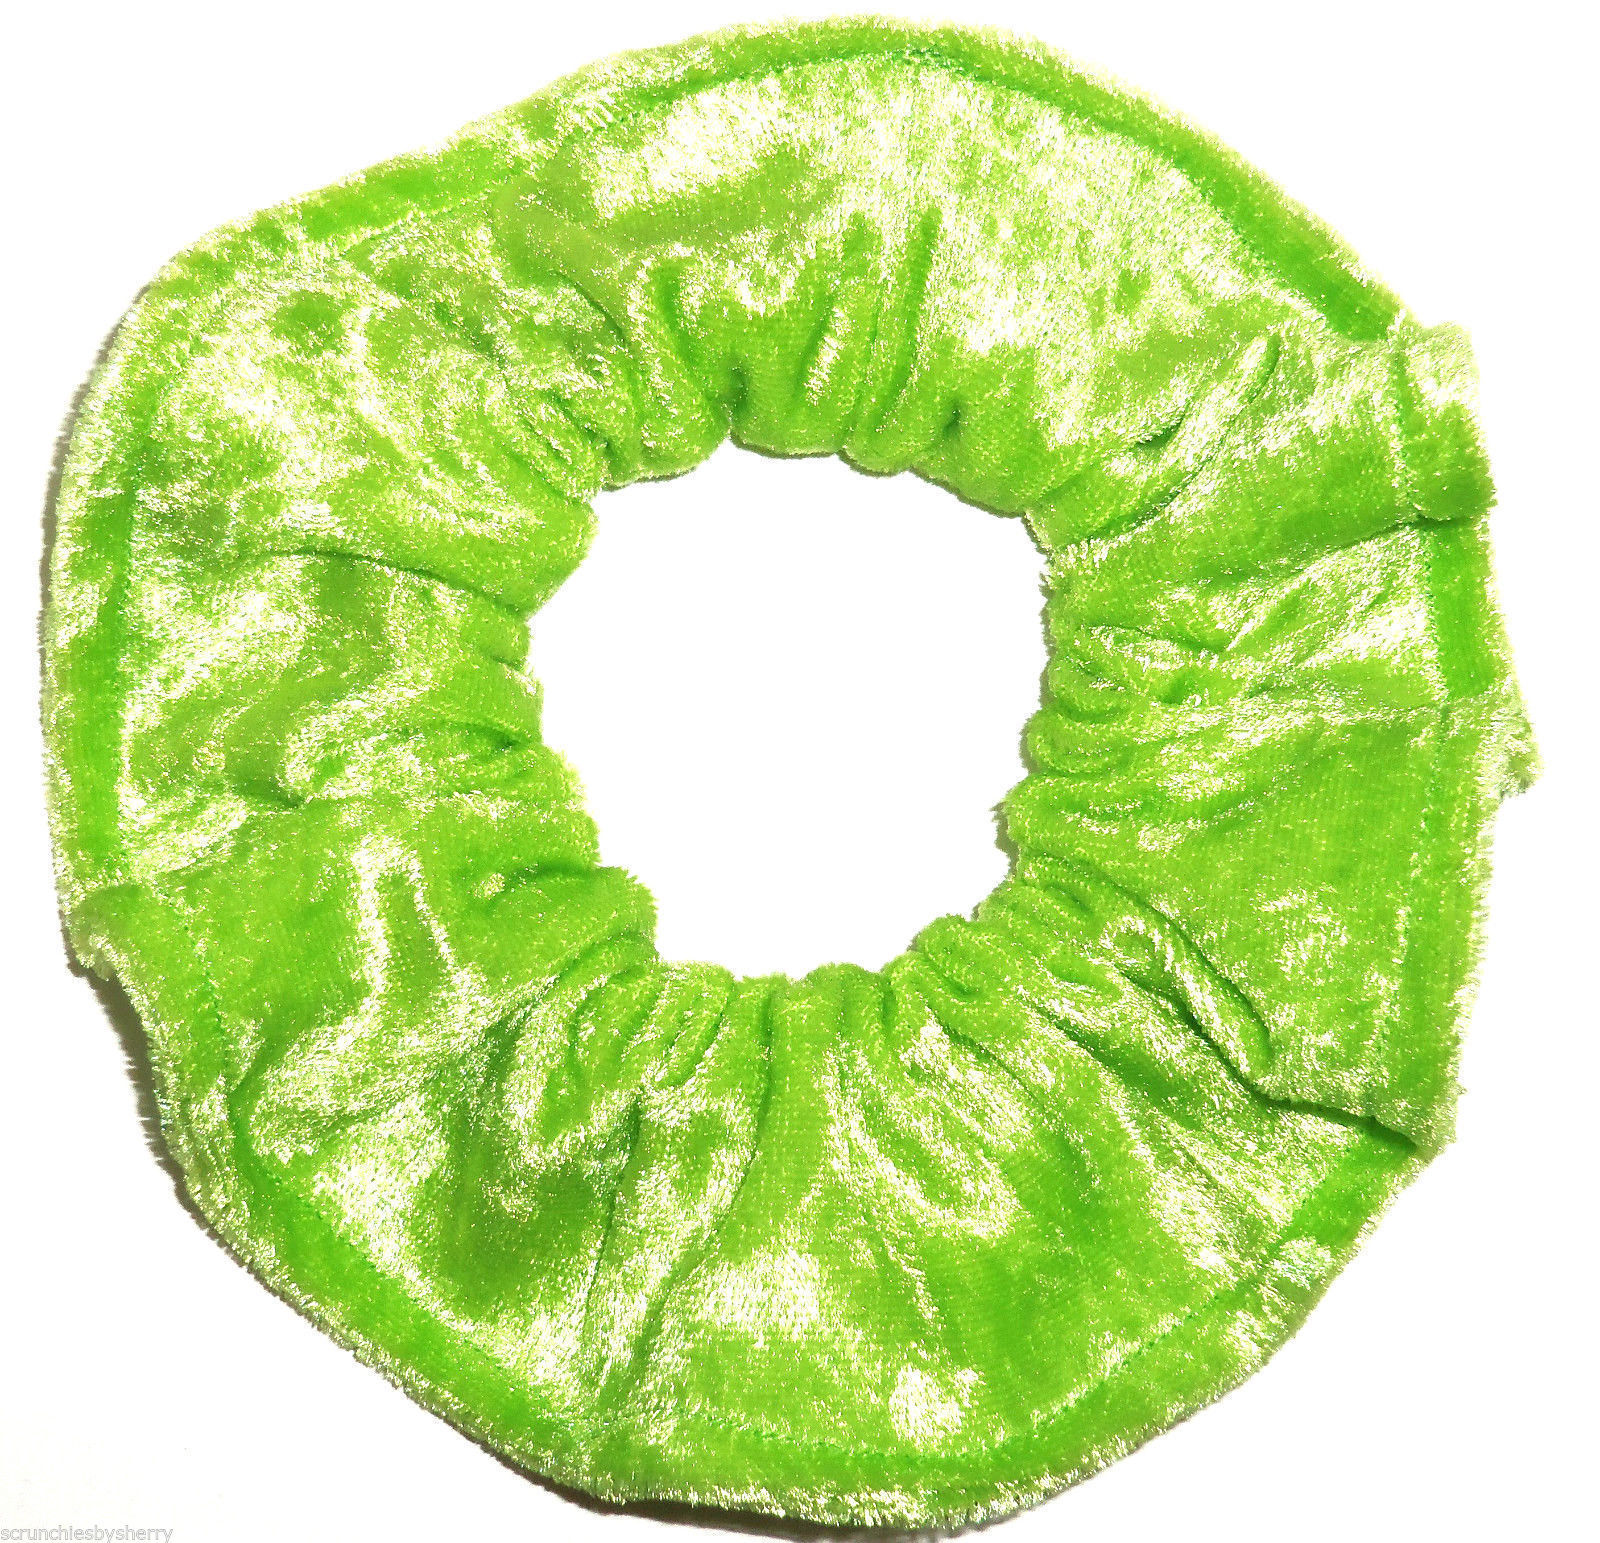 Primary image for Lime Green Panne Hair Scrunchie Scrunchies by Sherry Ponytail Holder Tie